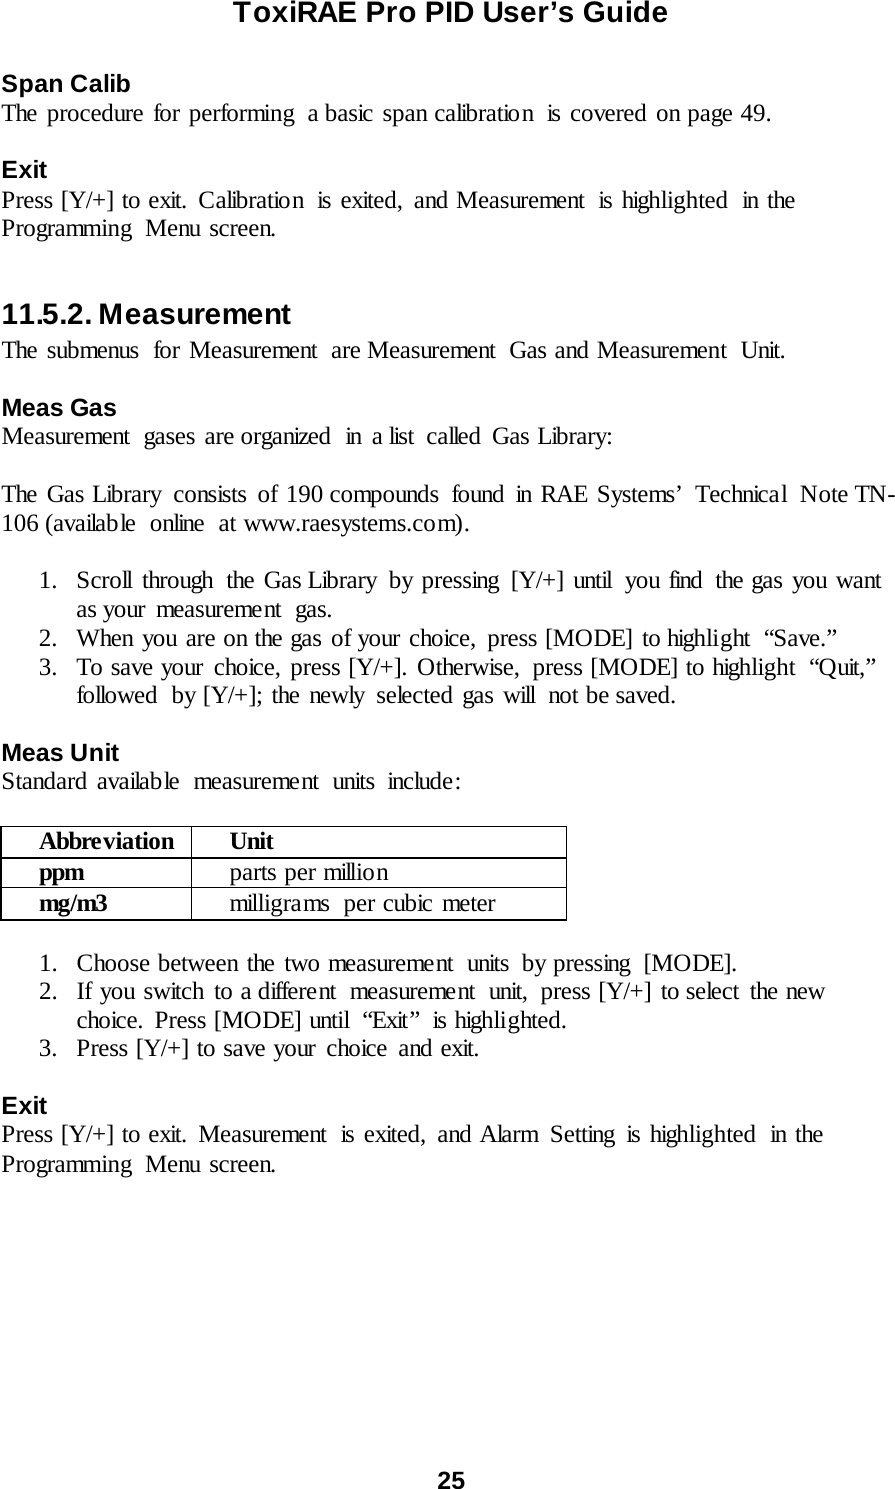 ToxiRAE Pro PID User’s Guide  25   Span Calib The procedure for performing  a basic span calibration  is covered on page 49.  Exit Press [Y/+] to exit. Calibration  is exited, and Measurement  is highlighted in the Programming  Menu screen.  11.5.2. Measurement The submenus for Measurement are Measurement Gas and Measurement Unit.   Meas Gas Measurement gases are organized  in  a list  called  Gas Library:  The Gas Library  consists of 190 compounds  found in RAE Systems’ Technical  Note TN-106 (available online at www.raesystems.com).  1. Scroll through the Gas Library by pressing [Y/+] until  you find  the gas you want as your  measurement  gas. 2. When you are on the gas of your choice, press [MODE] to highlight  “Save.” 3. To save your choice, press [Y/+]. Otherwise,  press [MODE] to highlight  “Quit,” followed  by [Y/+]; the newly selected gas will  not be saved.  Meas Unit Standard available measurement units include:  Abbreviation Unit ppm parts per millio n mg/m3 milligra ms  per cubic meter  1. Choose between the two measurement  units  by pressing  [MODE]. 2. If you switch to a different  measurement  unit, press [Y/+] to select the new choice. Press [MODE] until  “Exit”  is highlighted. 3. Press [Y/+] to save your choice and exit.  Exit Press [Y/+] to exit. Measurement  is exited, and Alarm  Setting  is highlighted in the Programming  Menu screen.    